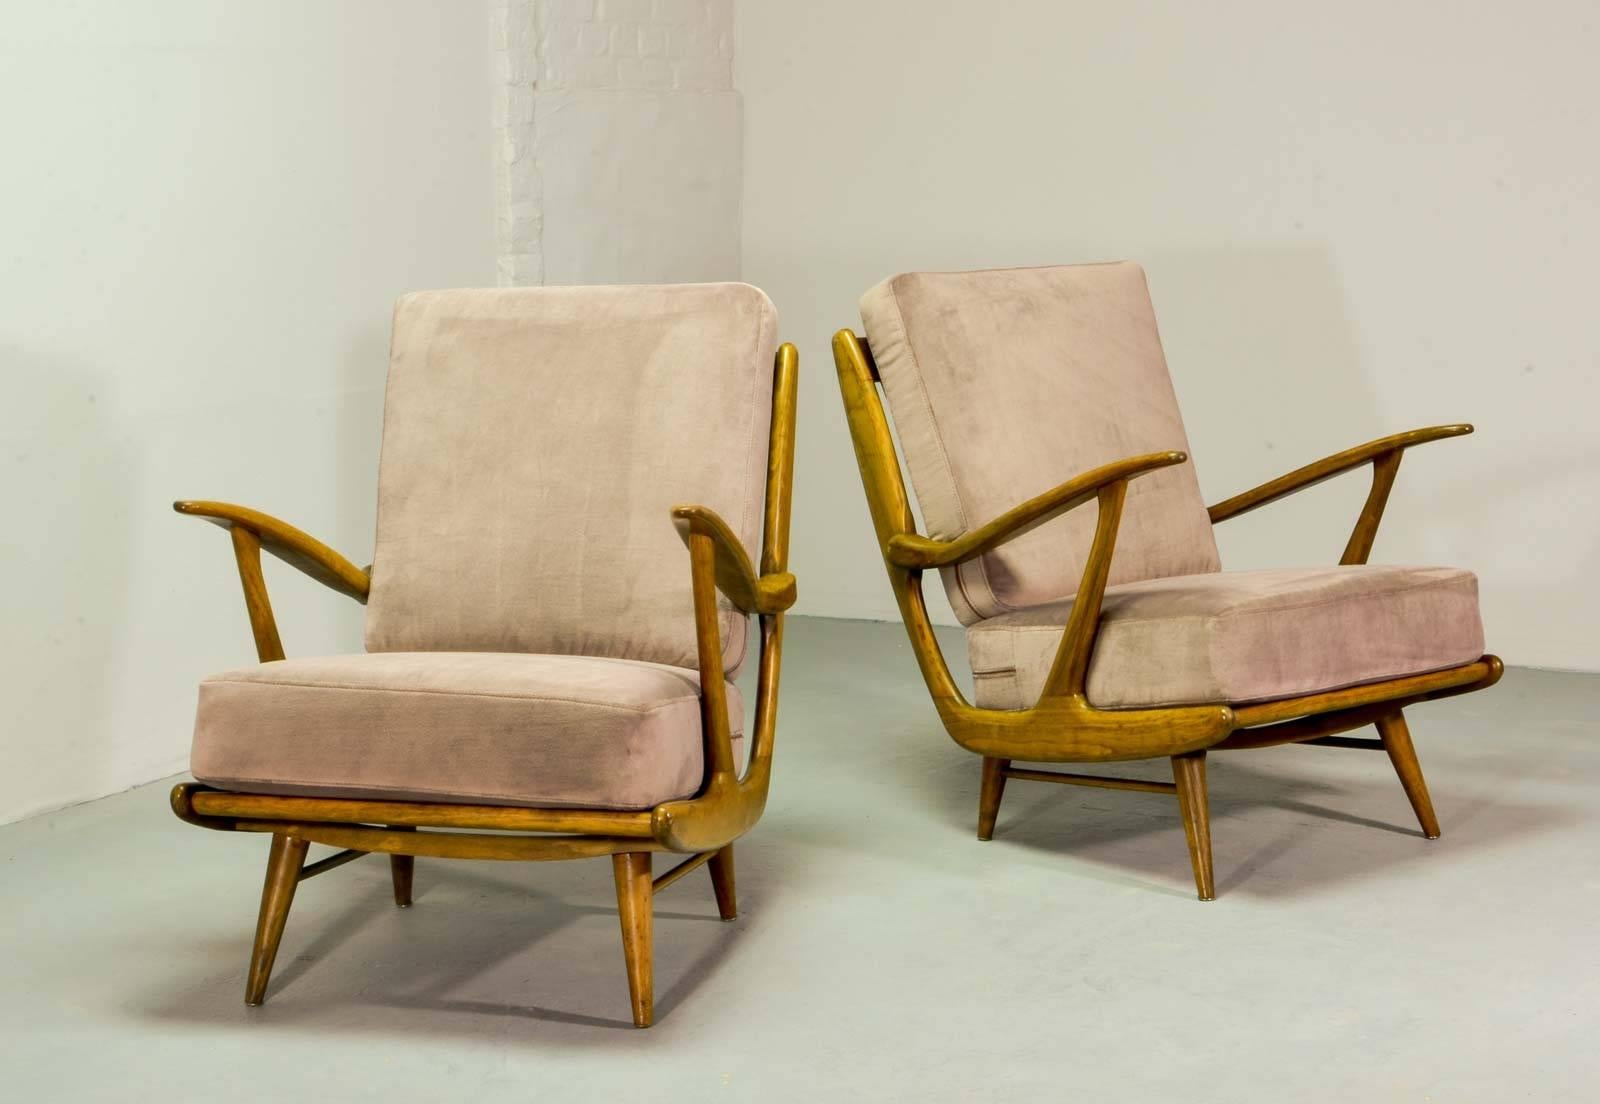 Art-Deco influenced Mid-Century set of lounge chairs with new mink colored velvet upholstery. The elegant organic shaped frame with spindle back is made of massive walnut wood. These very comfortable high quality chairs of the 1950s reminds of the